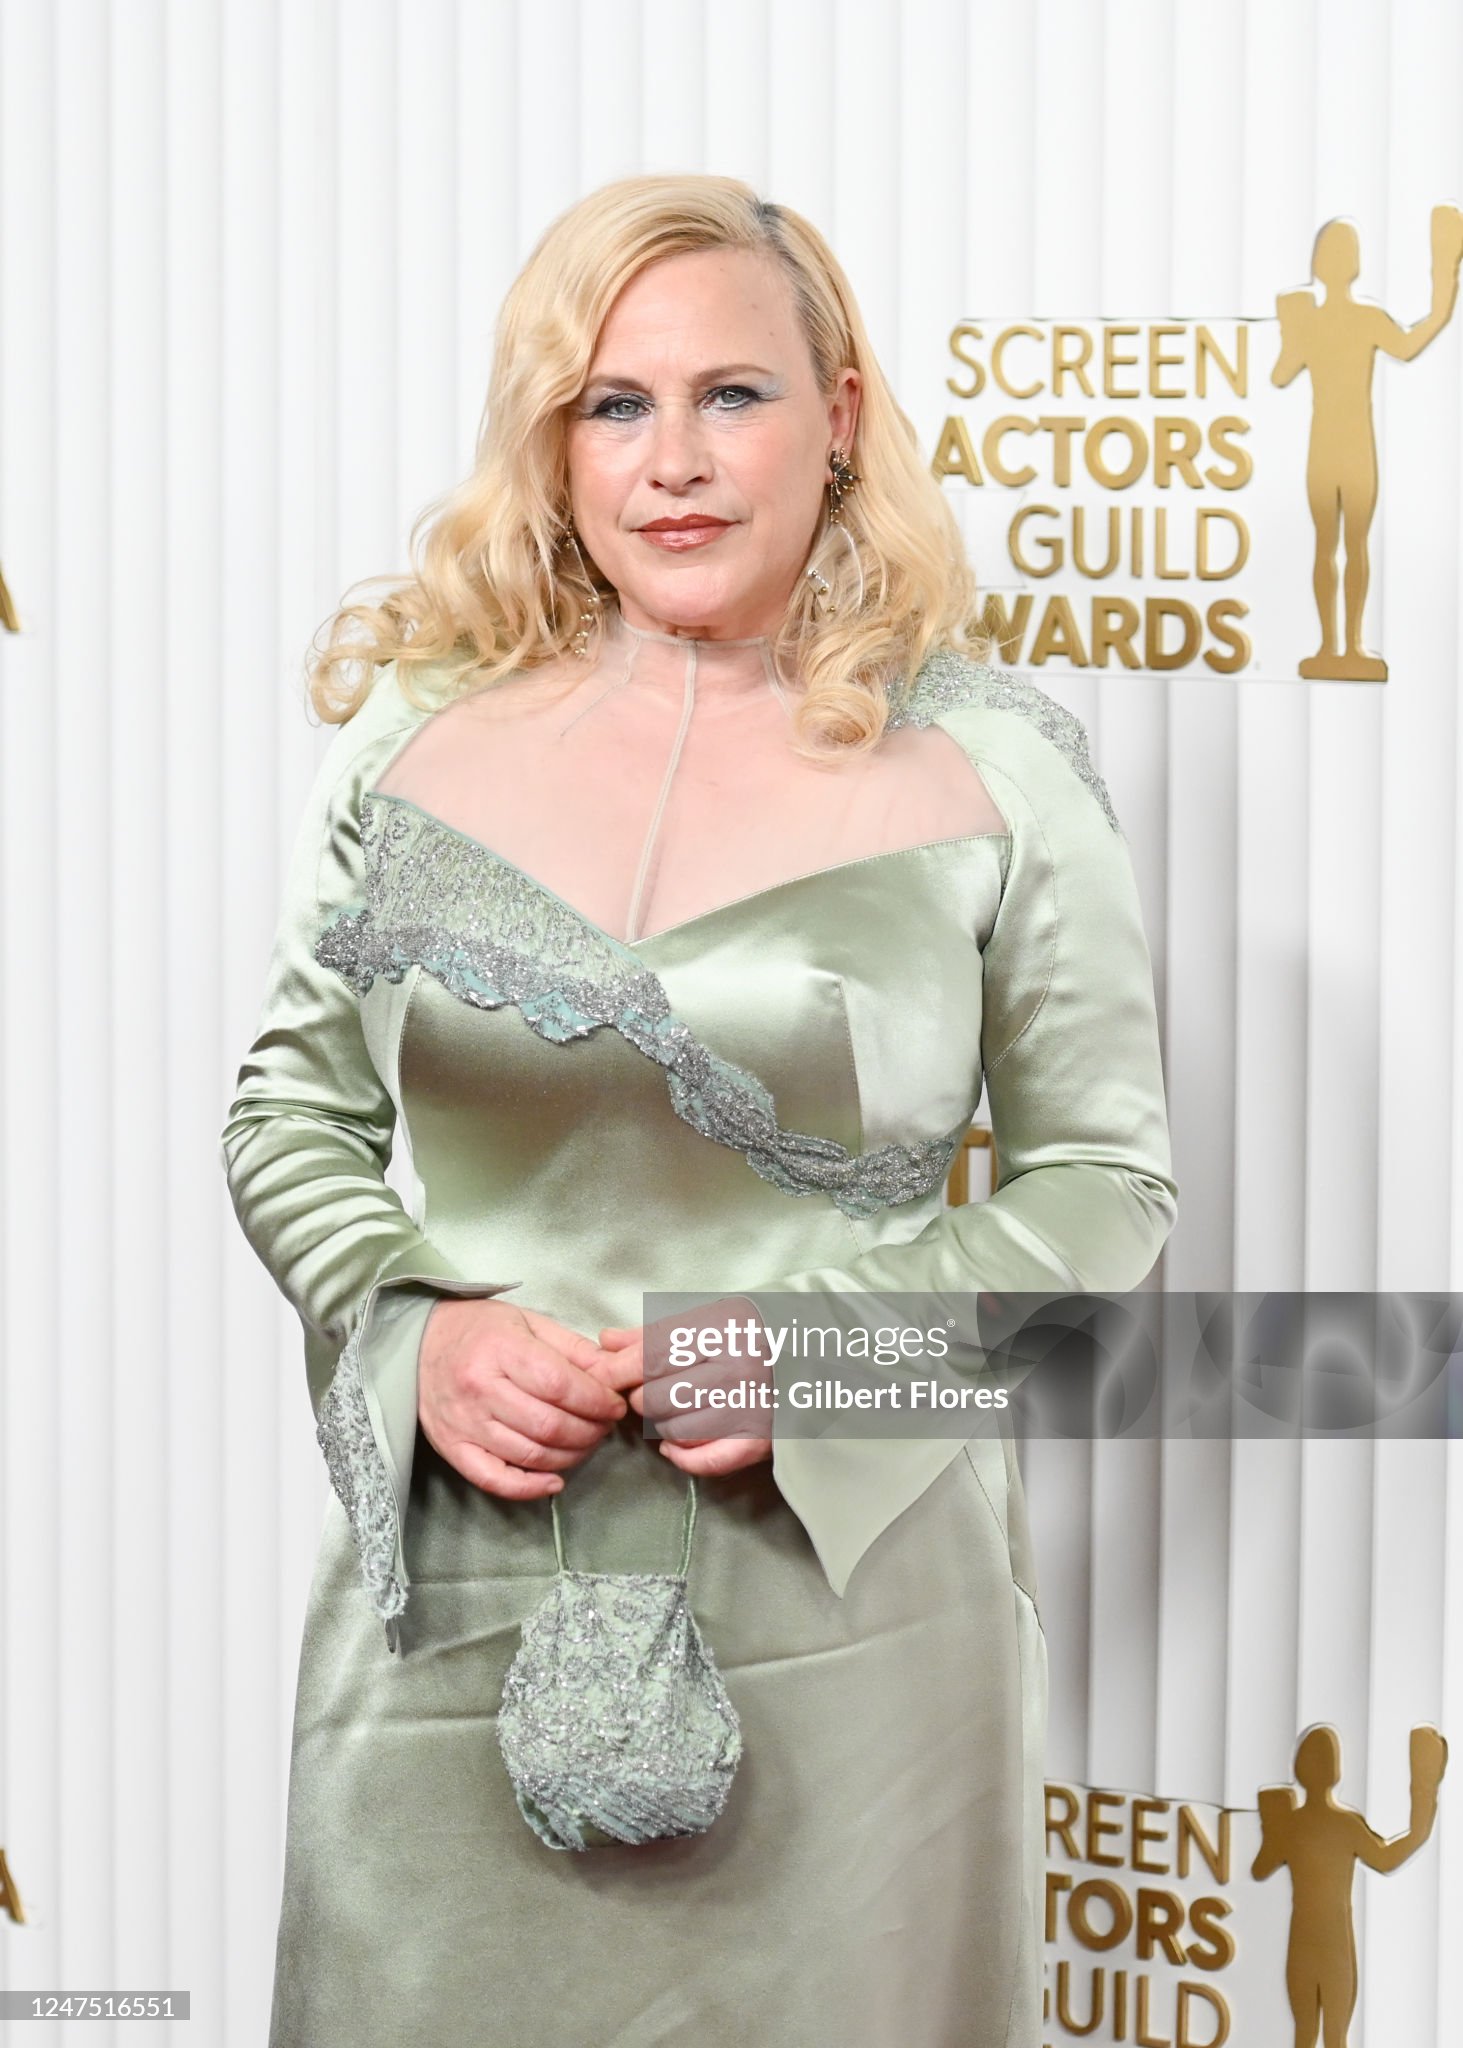 patricia-arquette-at-the-29th-annual-screen-actors-guild-awards-held-at-the-fairmont-century.jpg